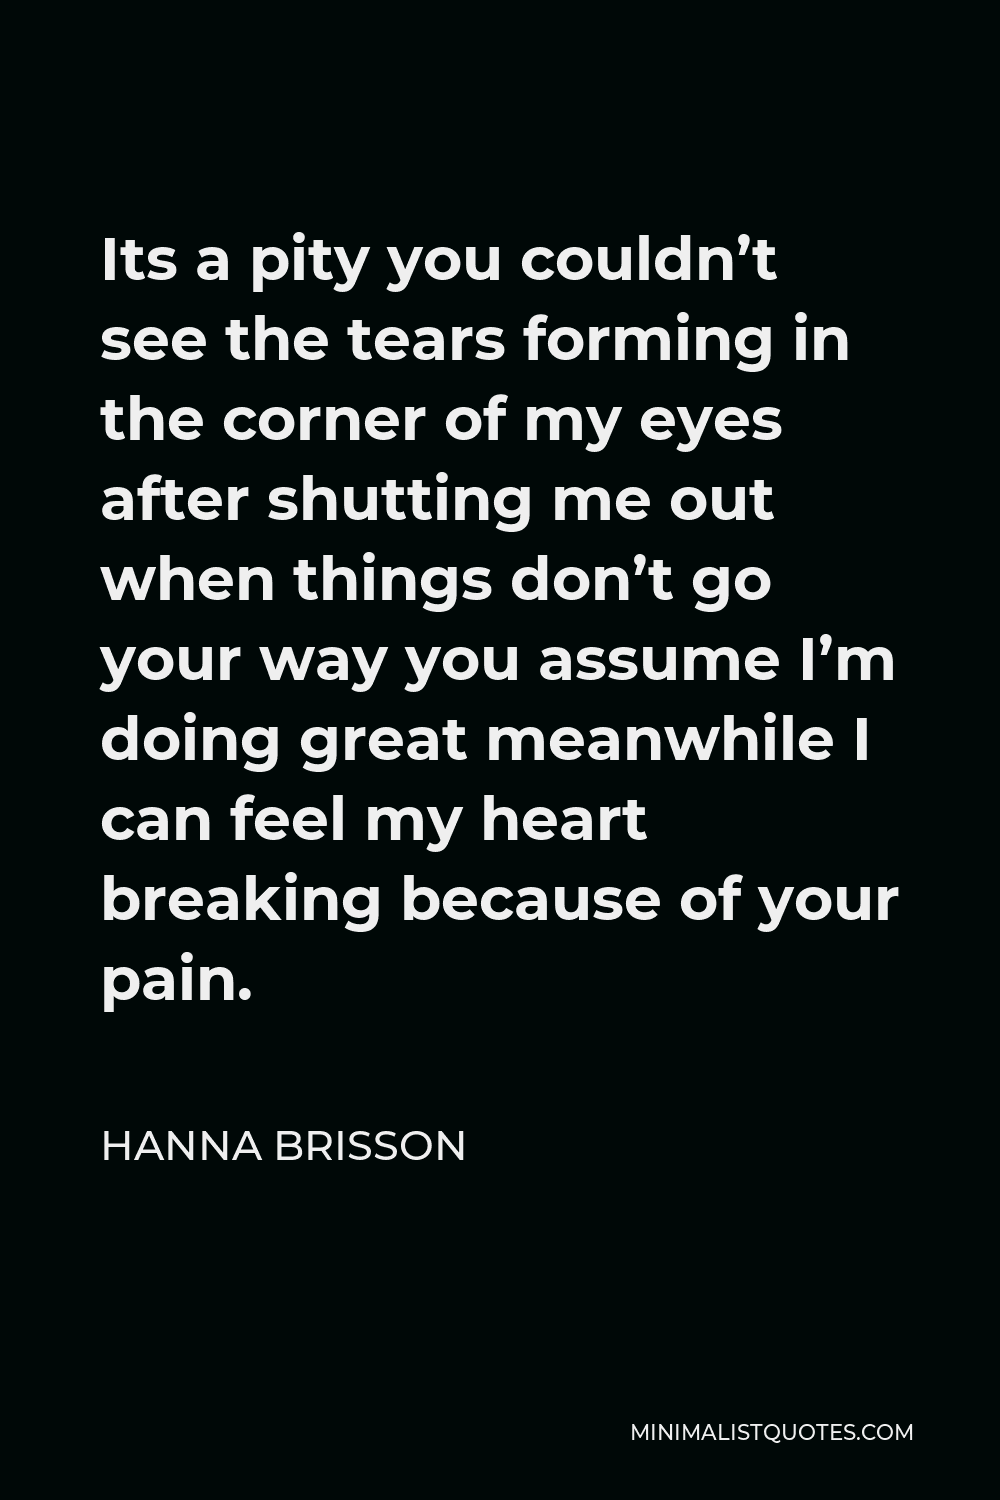 Hanna Brisson Quote - Its a pity you couldn’t see the tears forming in the corner of my eyes after shutting me out when things don’t go your way you assume I’m doing great meanwhile I can feel my heart breaking because of your pain.